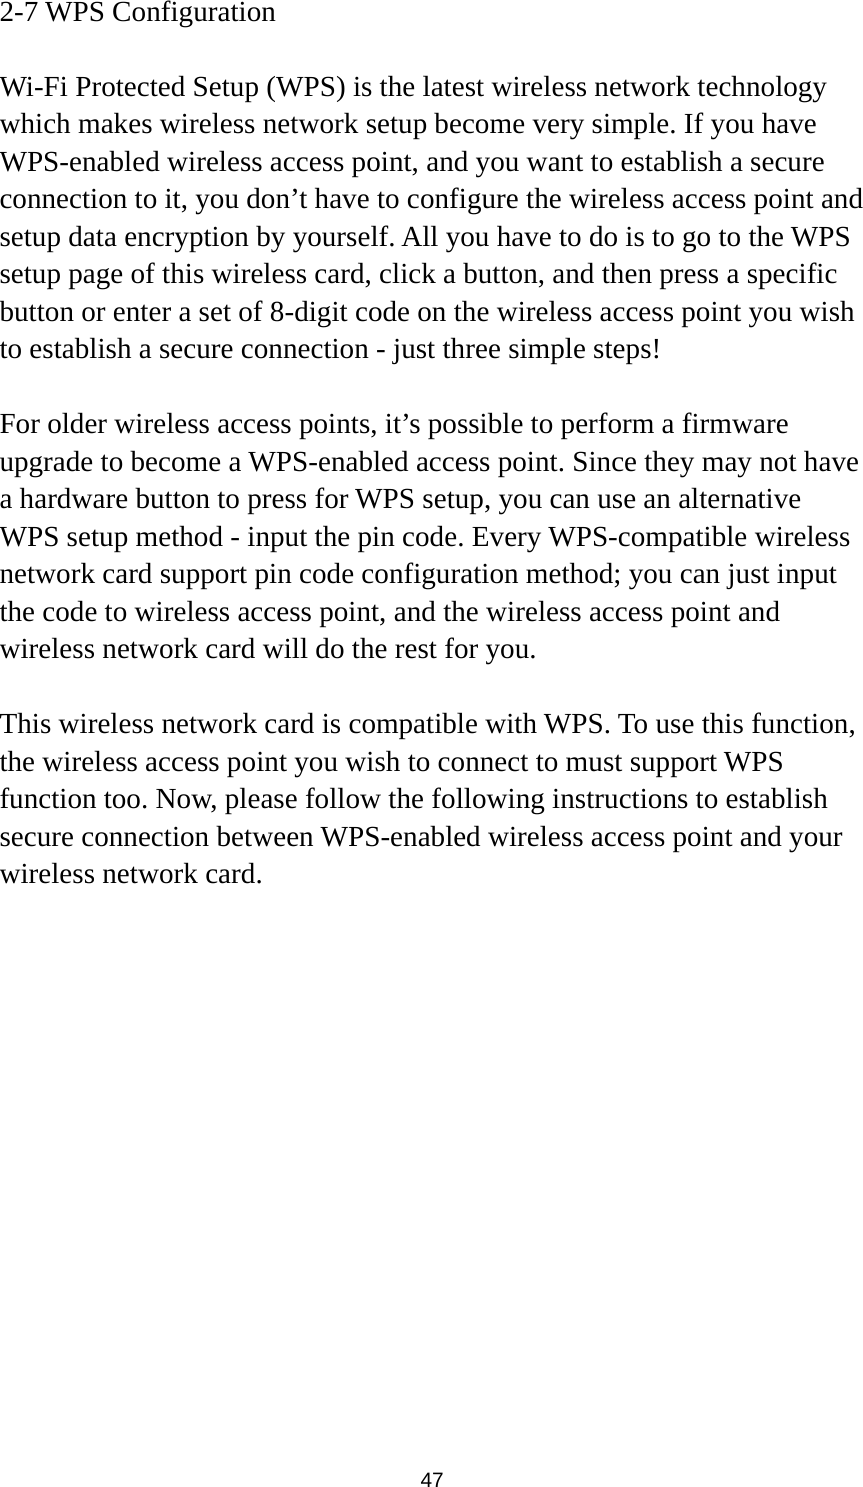  47 2-7 WPS Configuration  Wi-Fi Protected Setup (WPS) is the latest wireless network technology which makes wireless network setup become very simple. If you have WPS-enabled wireless access point, and you want to establish a secure connection to it, you don’t have to configure the wireless access point and setup data encryption by yourself. All you have to do is to go to the WPS setup page of this wireless card, click a button, and then press a specific button or enter a set of 8-digit code on the wireless access point you wish to establish a secure connection - just three simple steps!    For older wireless access points, it’s possible to perform a firmware upgrade to become a WPS-enabled access point. Since they may not have a hardware button to press for WPS setup, you can use an alternative WPS setup method - input the pin code. Every WPS-compatible wireless network card support pin code configuration method; you can just input the code to wireless access point, and the wireless access point and wireless network card will do the rest for you.  This wireless network card is compatible with WPS. To use this function, the wireless access point you wish to connect to must support WPS function too. Now, please follow the following instructions to establish secure connection between WPS-enabled wireless access point and your wireless network card. 